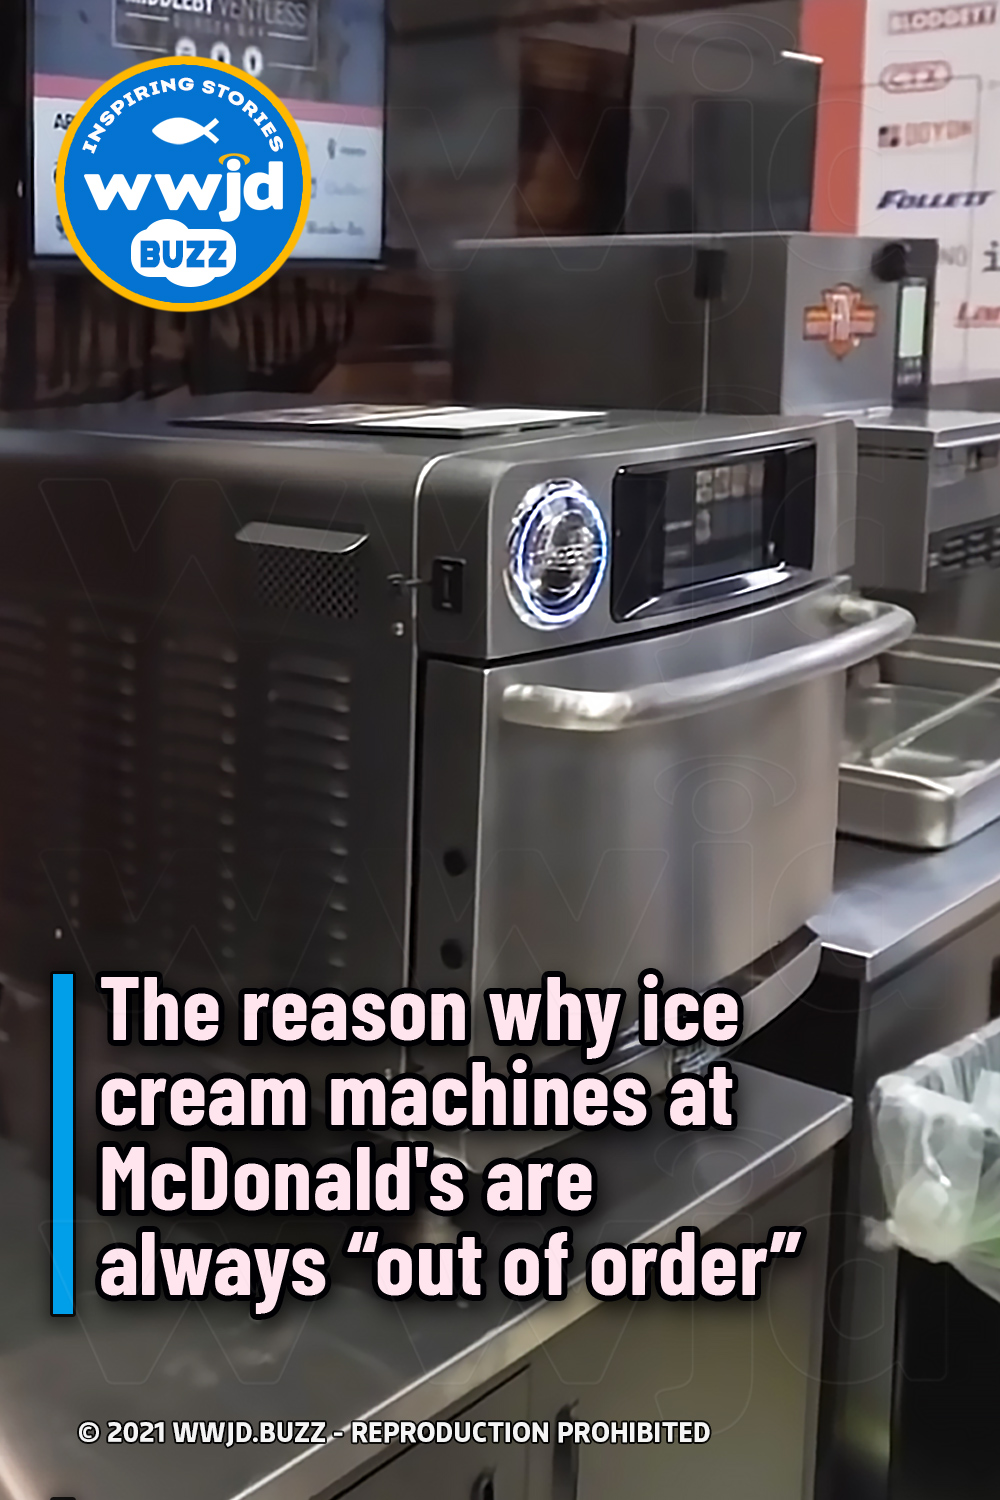 The reason why ice cream machines at McDonald\'s are always “out of order”